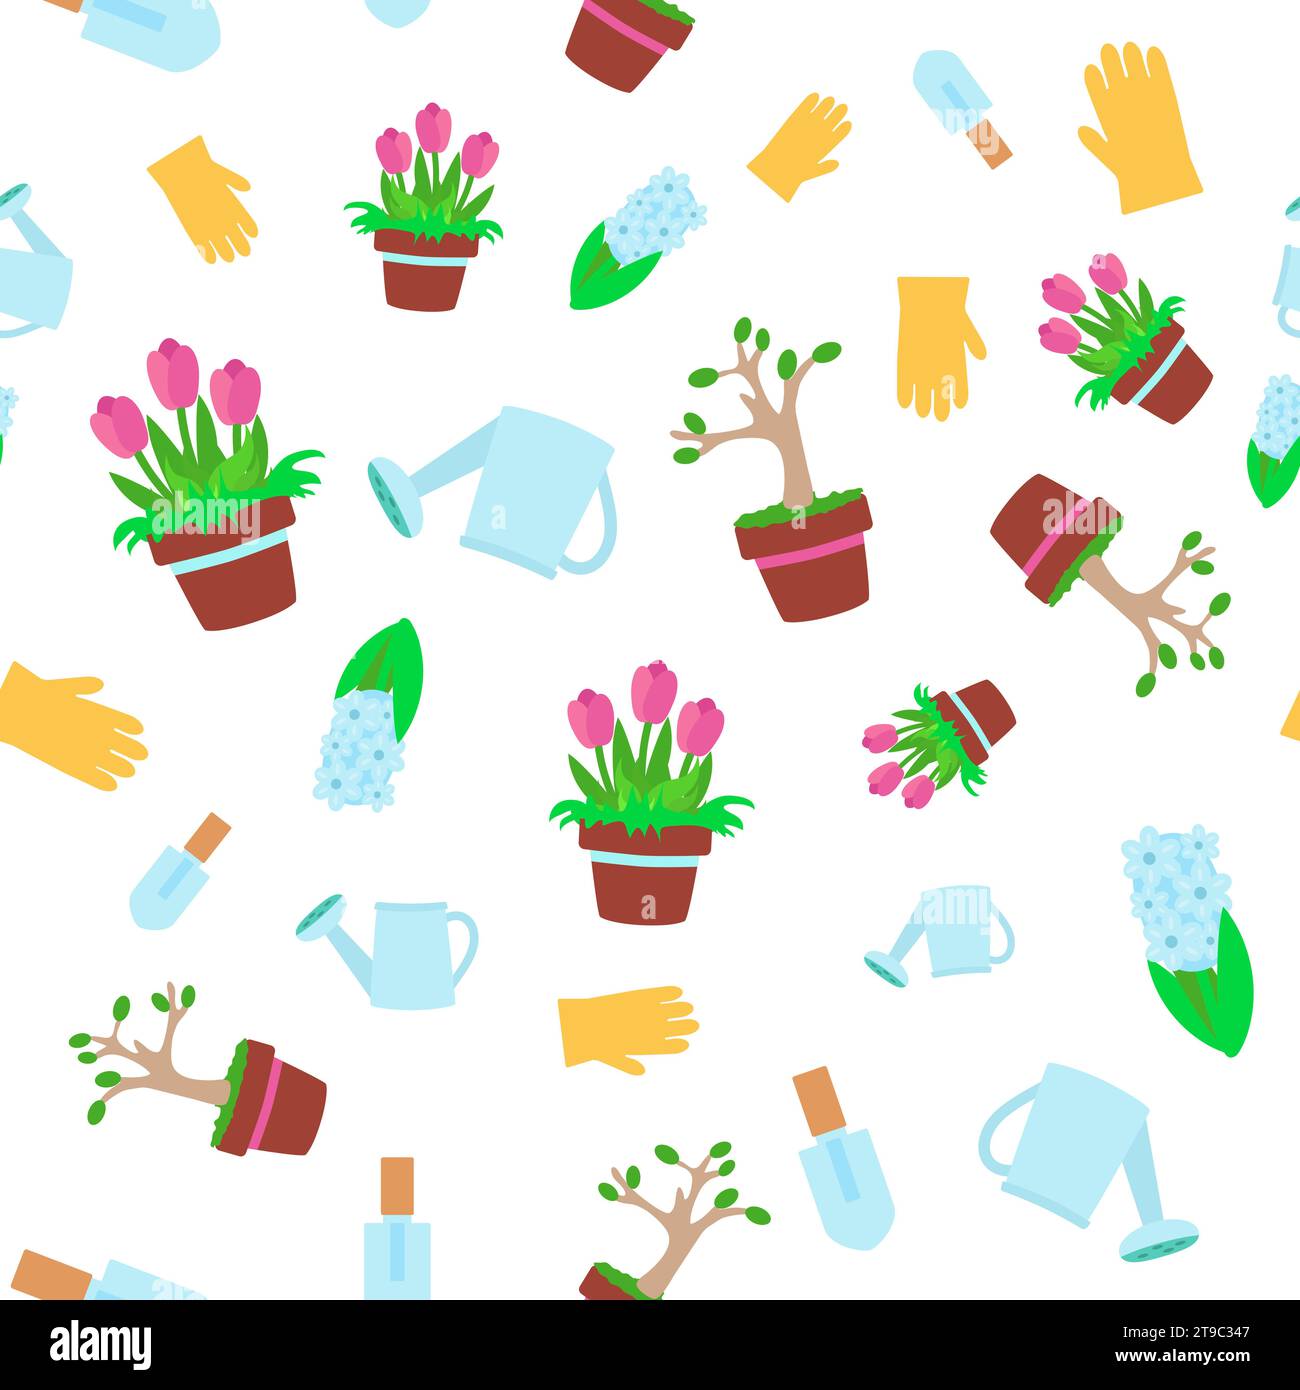 Seamless pattern garden tools watering can, shovels, rakes and gloves, potted tulips and hyacinth. Ornament for textiles, packaging, background design Stock Vector